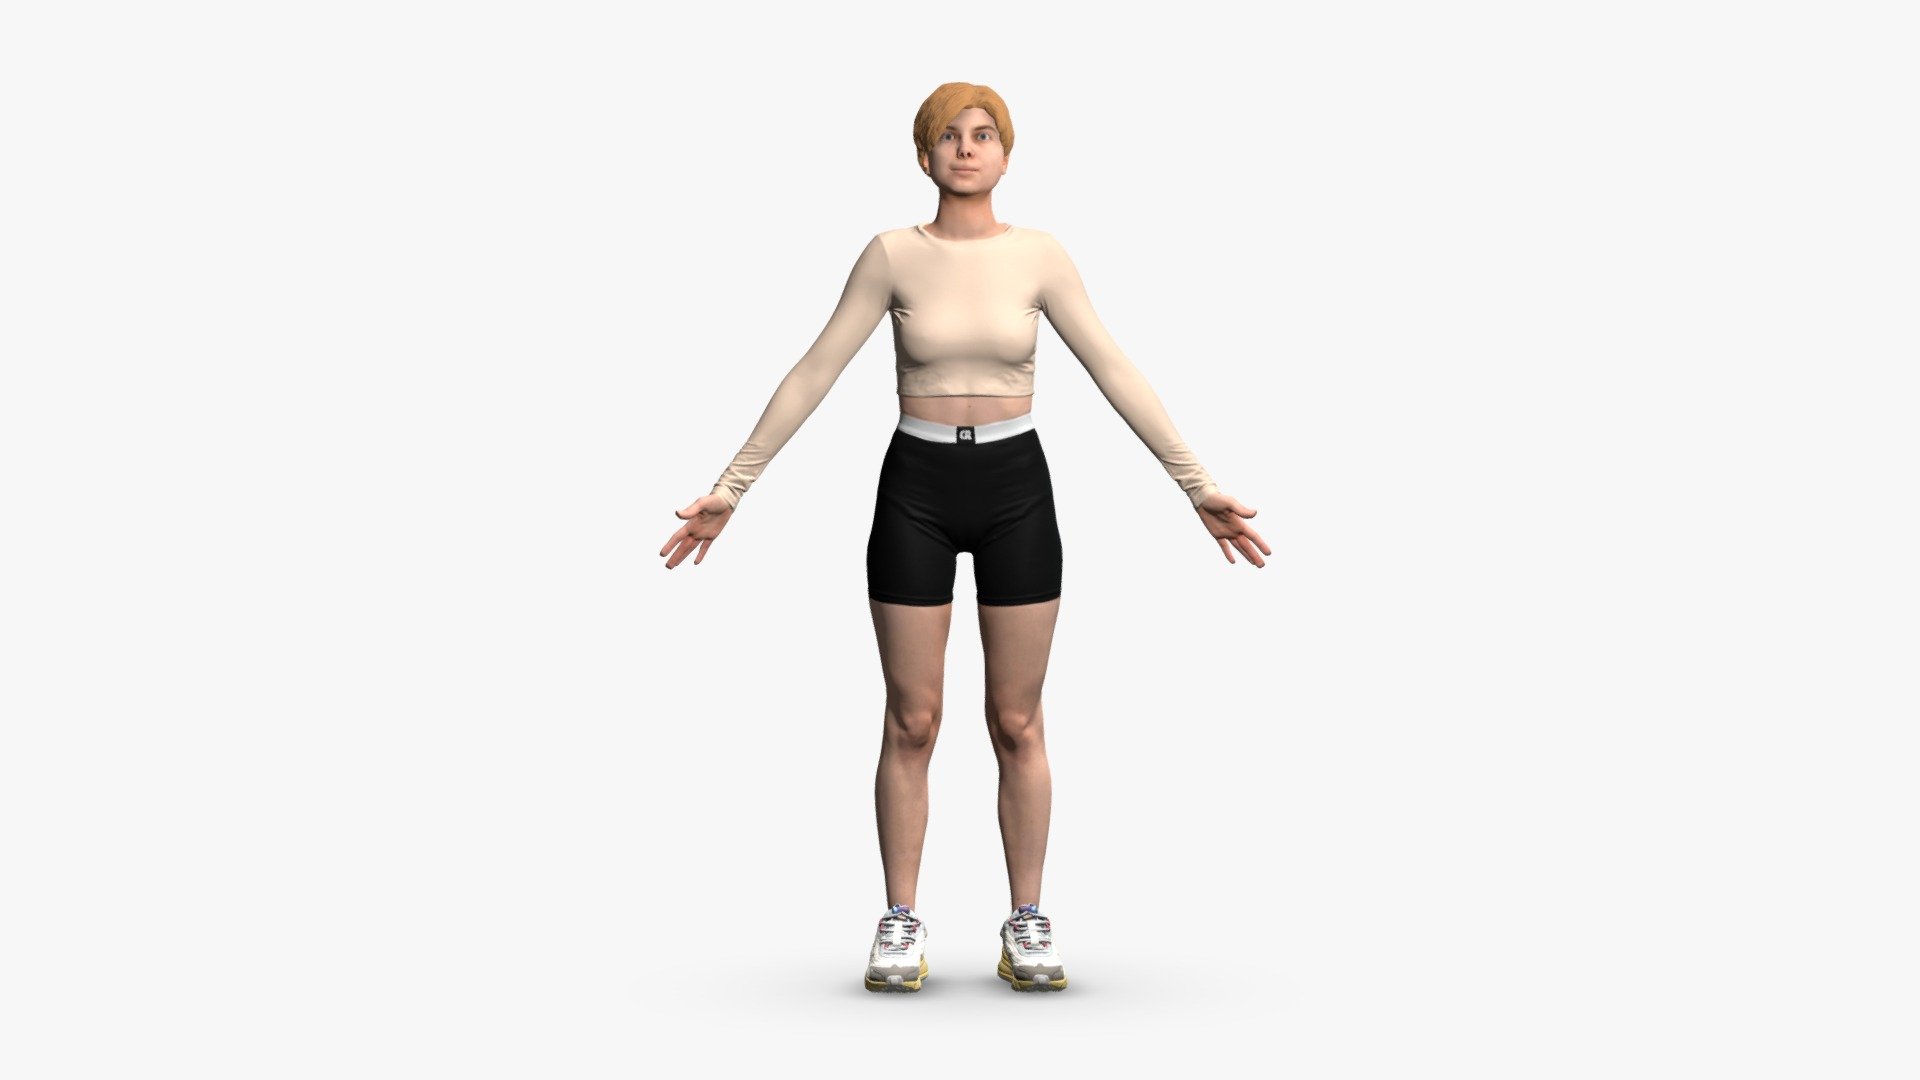 Introducing our latest 3D model - &ldquo;Fitness girl in &ldquo;A